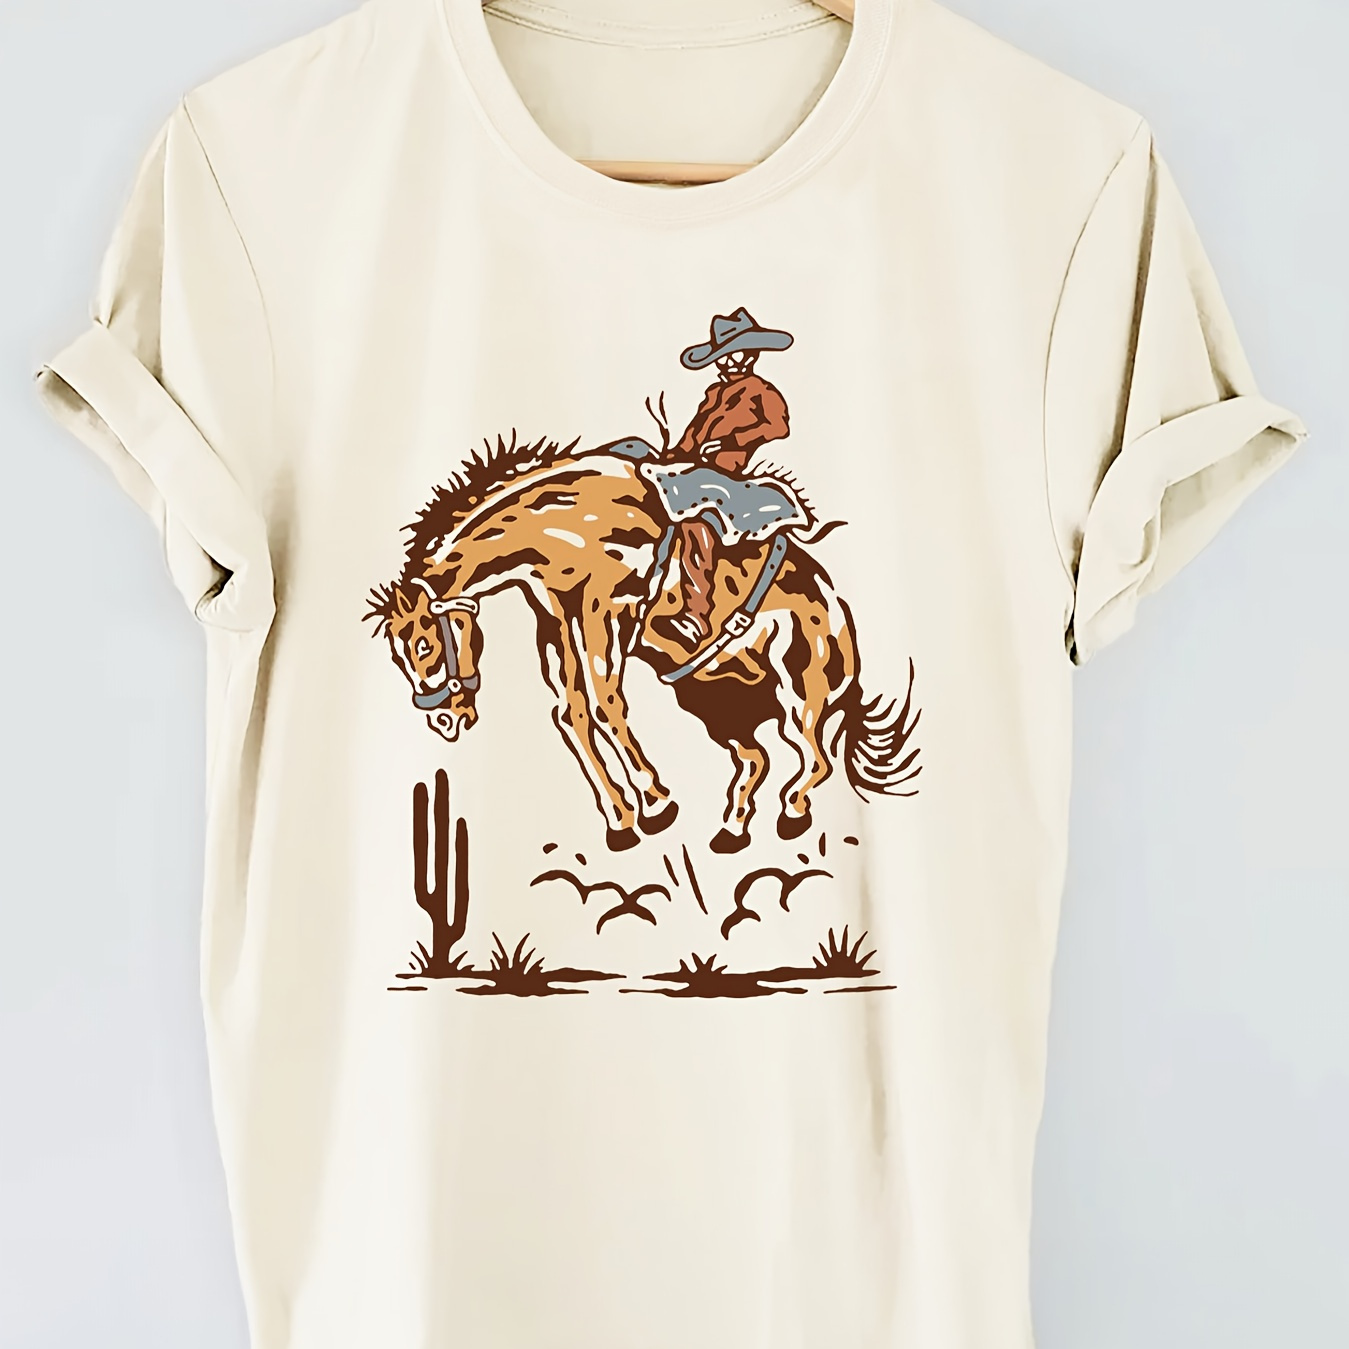 

Horse Print T-shirt, Short Sleeve Crew Neck Casual Top For Summer & Spring, Women's Clothing